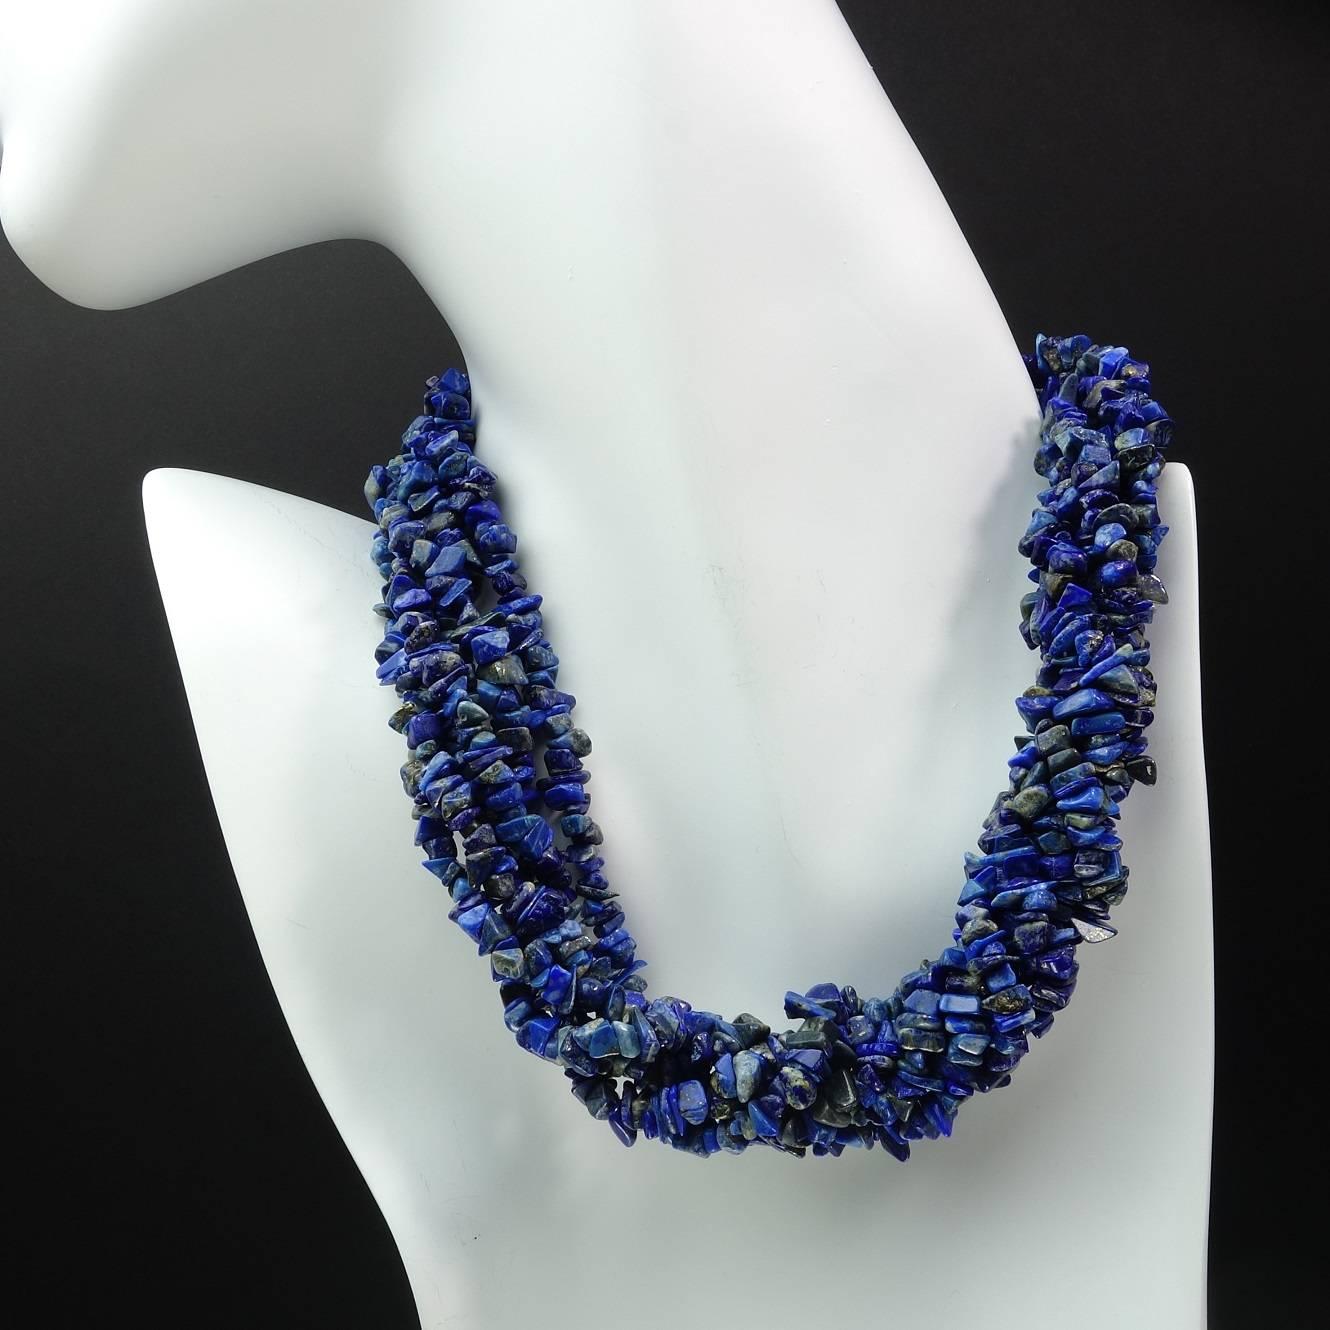 Three 34 inch loops of polished lapis lazuli chips (4-6mm) to wrap or wear as you choose with both a silver and a gold tone clasp. Striking blue color that contrasts beautifully against black or white.  The shape of the stones are uneven with an